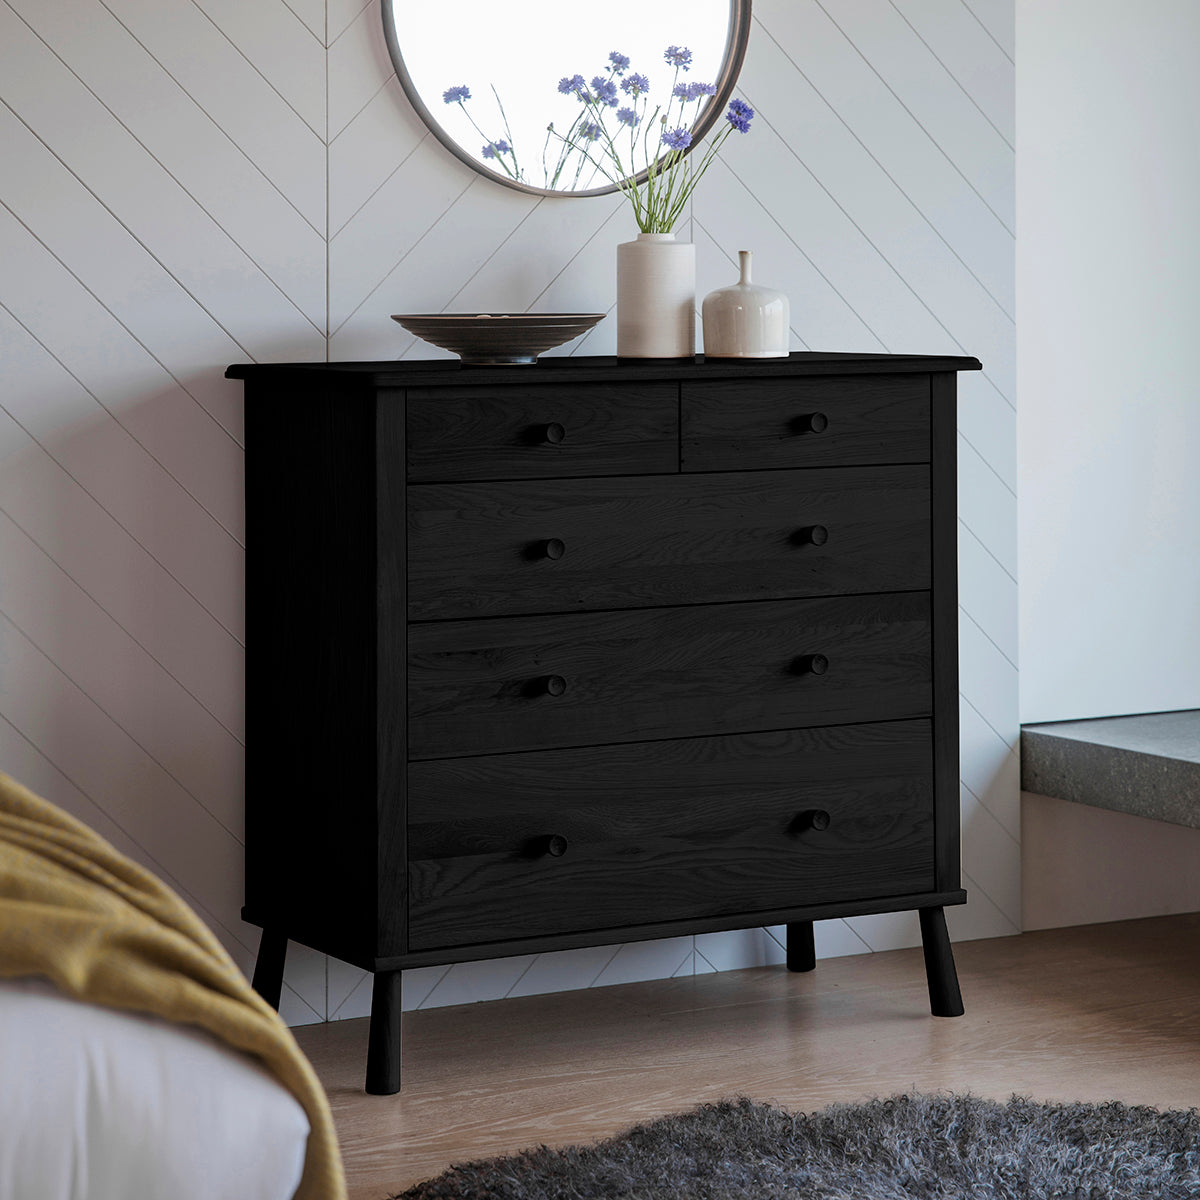 Axel nordic style chest of drawers in black oak with 5 drawers | MalletandPlane.com